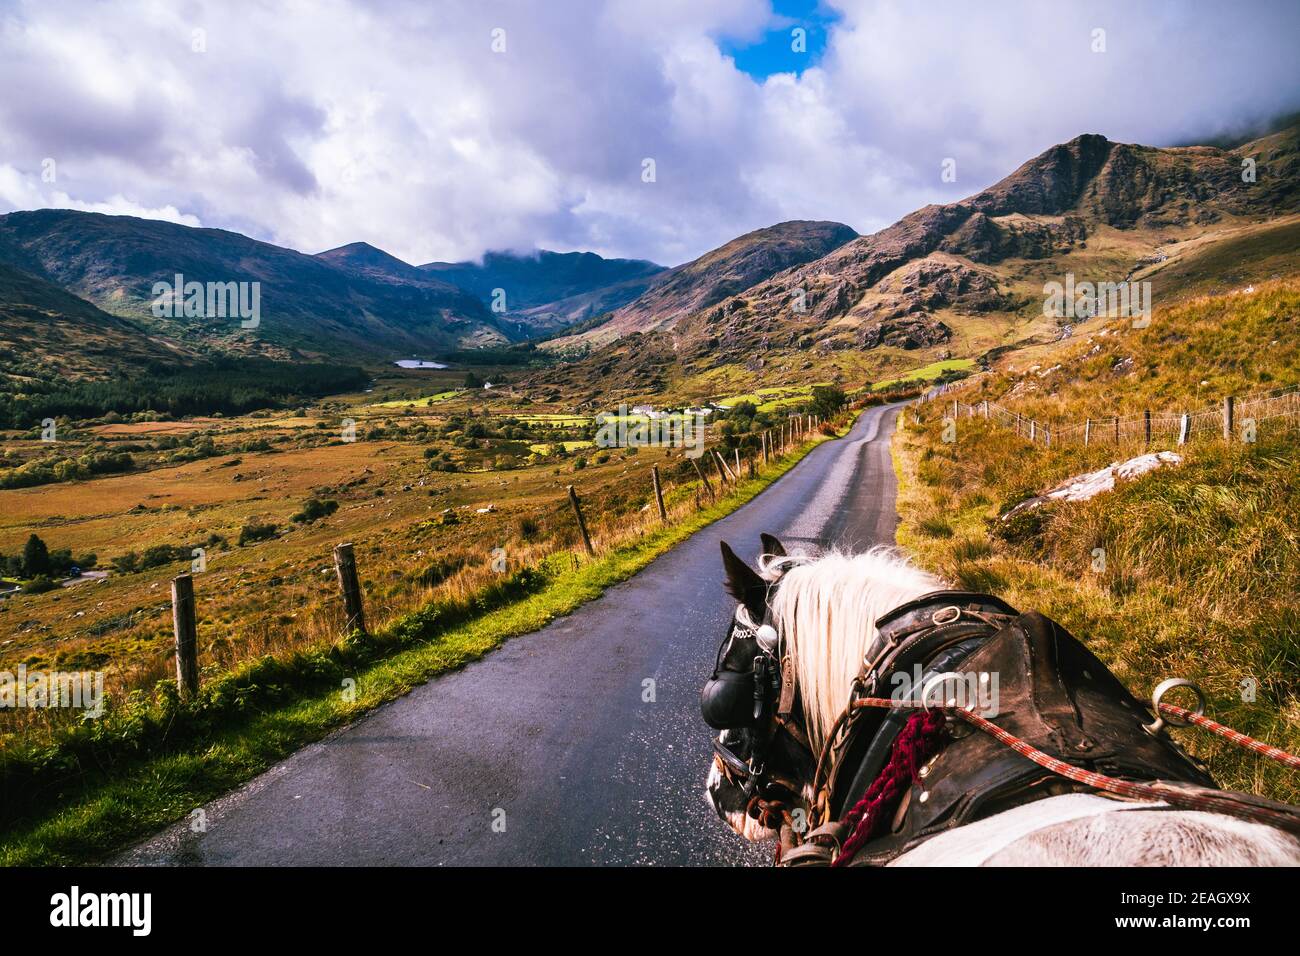 Landscape of the Black Valley from the jumping cart with a horse. Stock Photo